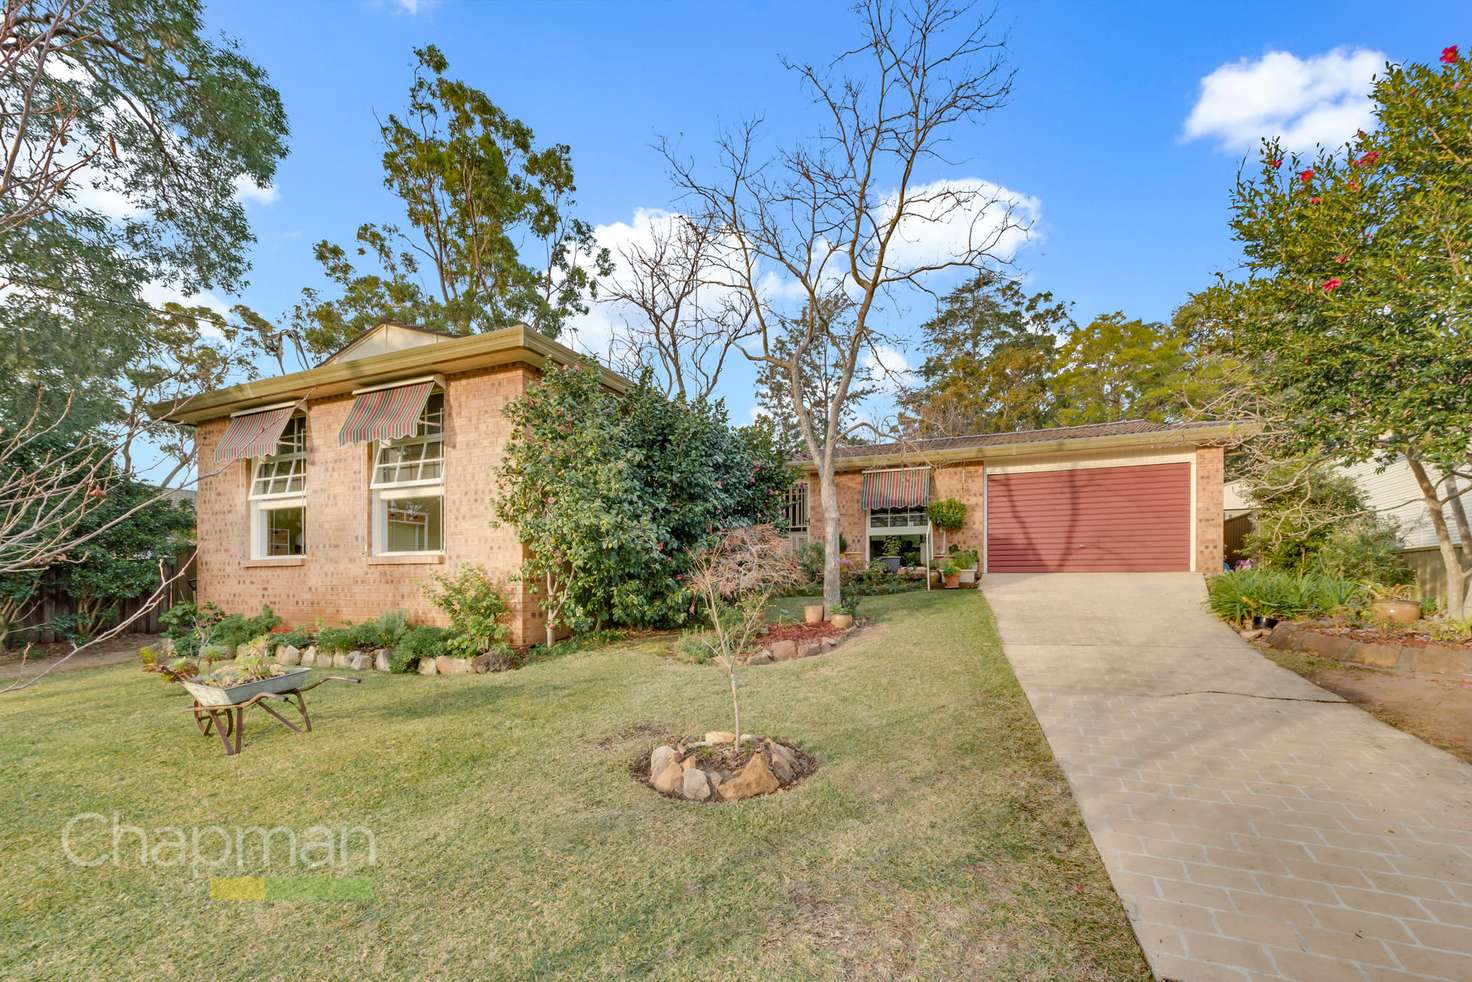 Main view of Homely house listing, 9 Lewin Street, Blaxland NSW 2774